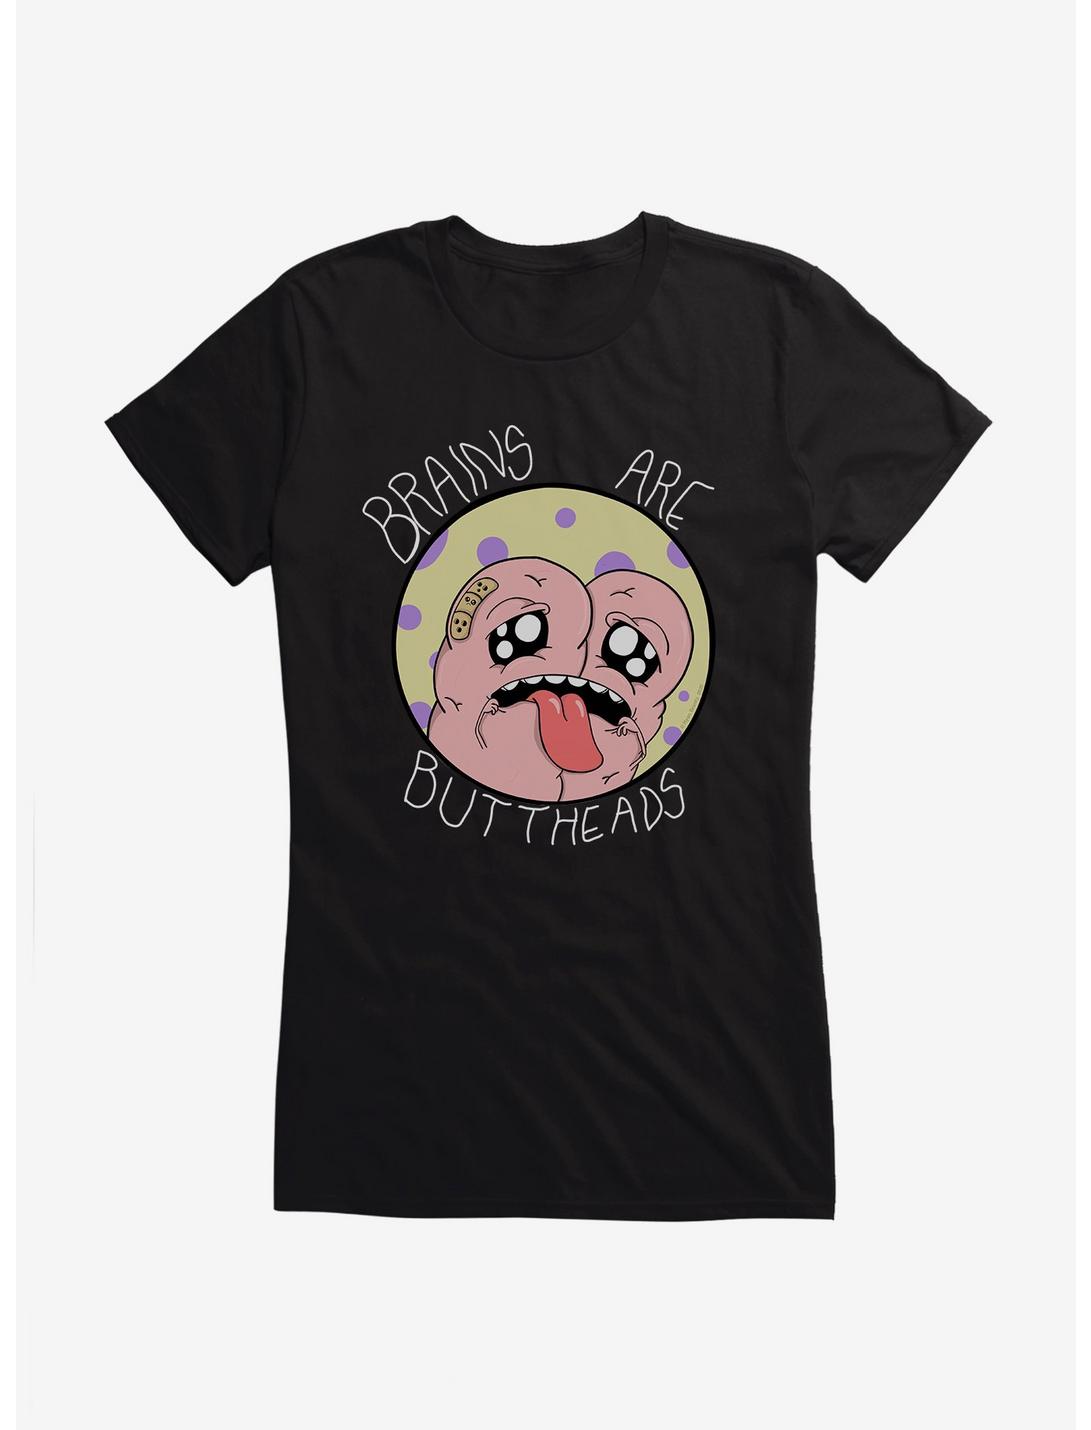 Depressed Monsters Brains Are Buttheads Girls T-Shirt By Ryan Brunty, , hi-res